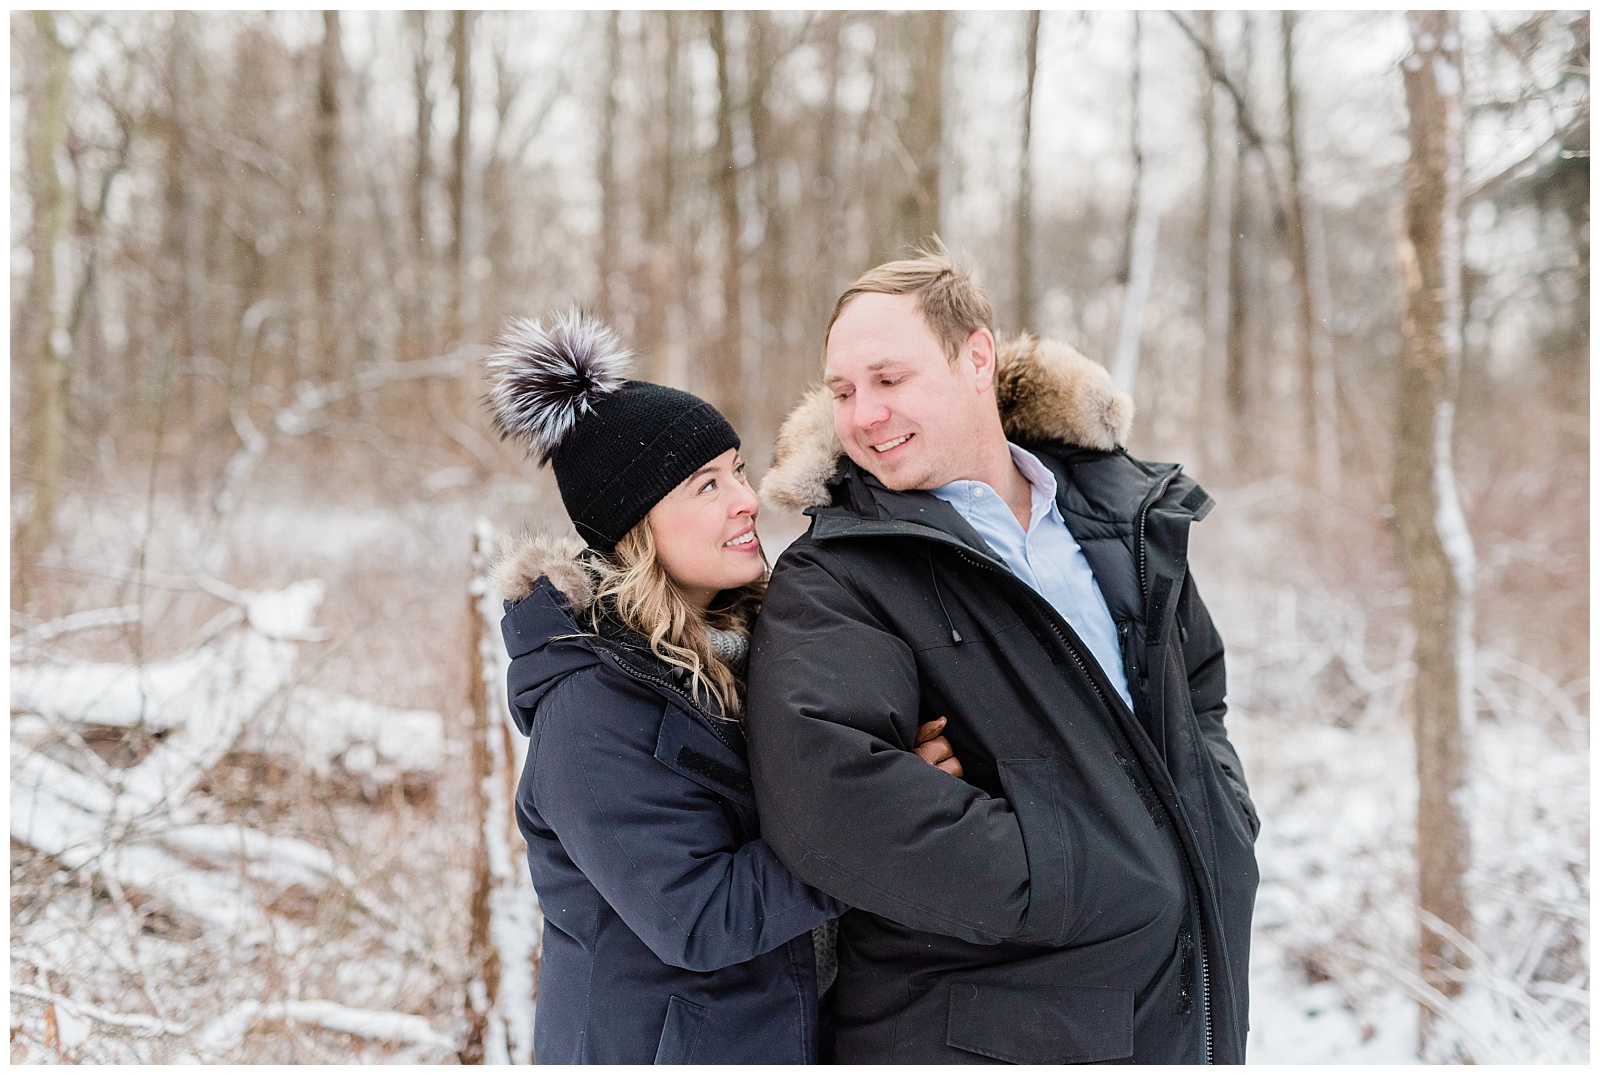 New Jersey Engagement Session, Snowy, Winter, Cozy, Session, Wedding Photographer, Cross Estate Gardens, Snow, Wintry, Light and Airy, Woods